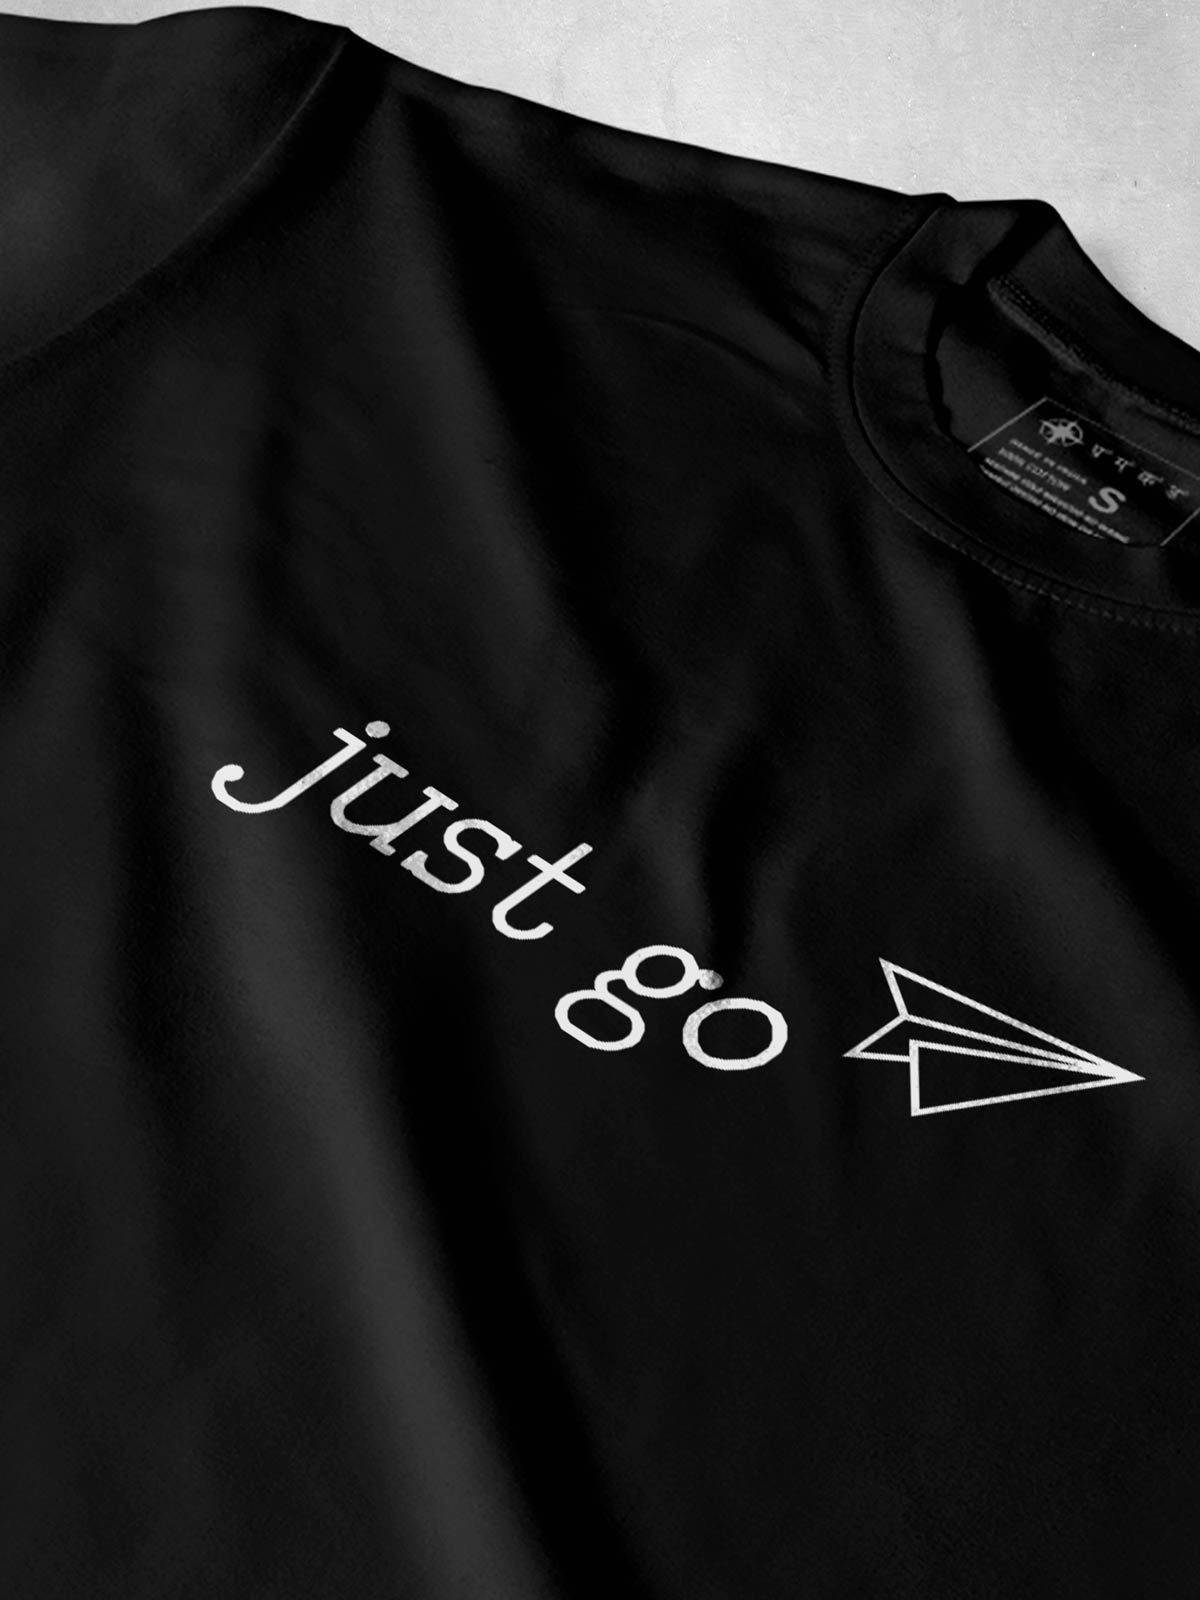 Just-go-printed-t-shirt-for-men by Ghumakkad